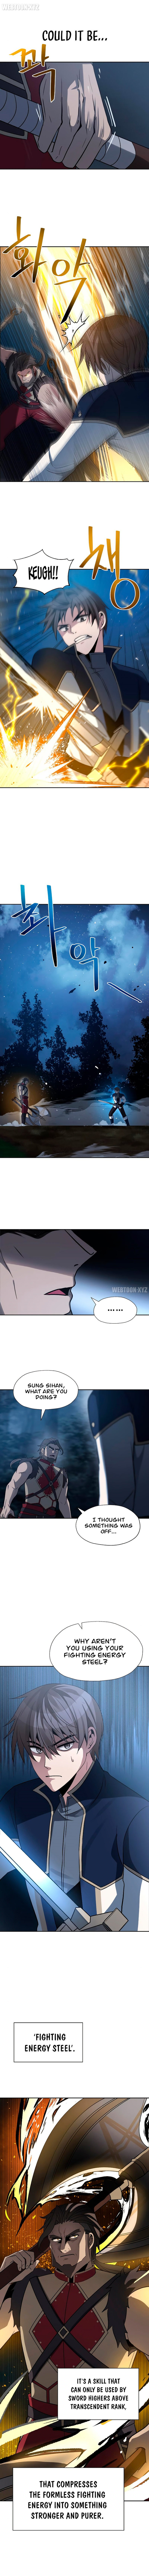 transmigrating-to-the-otherworld-once-more-chap-36-5